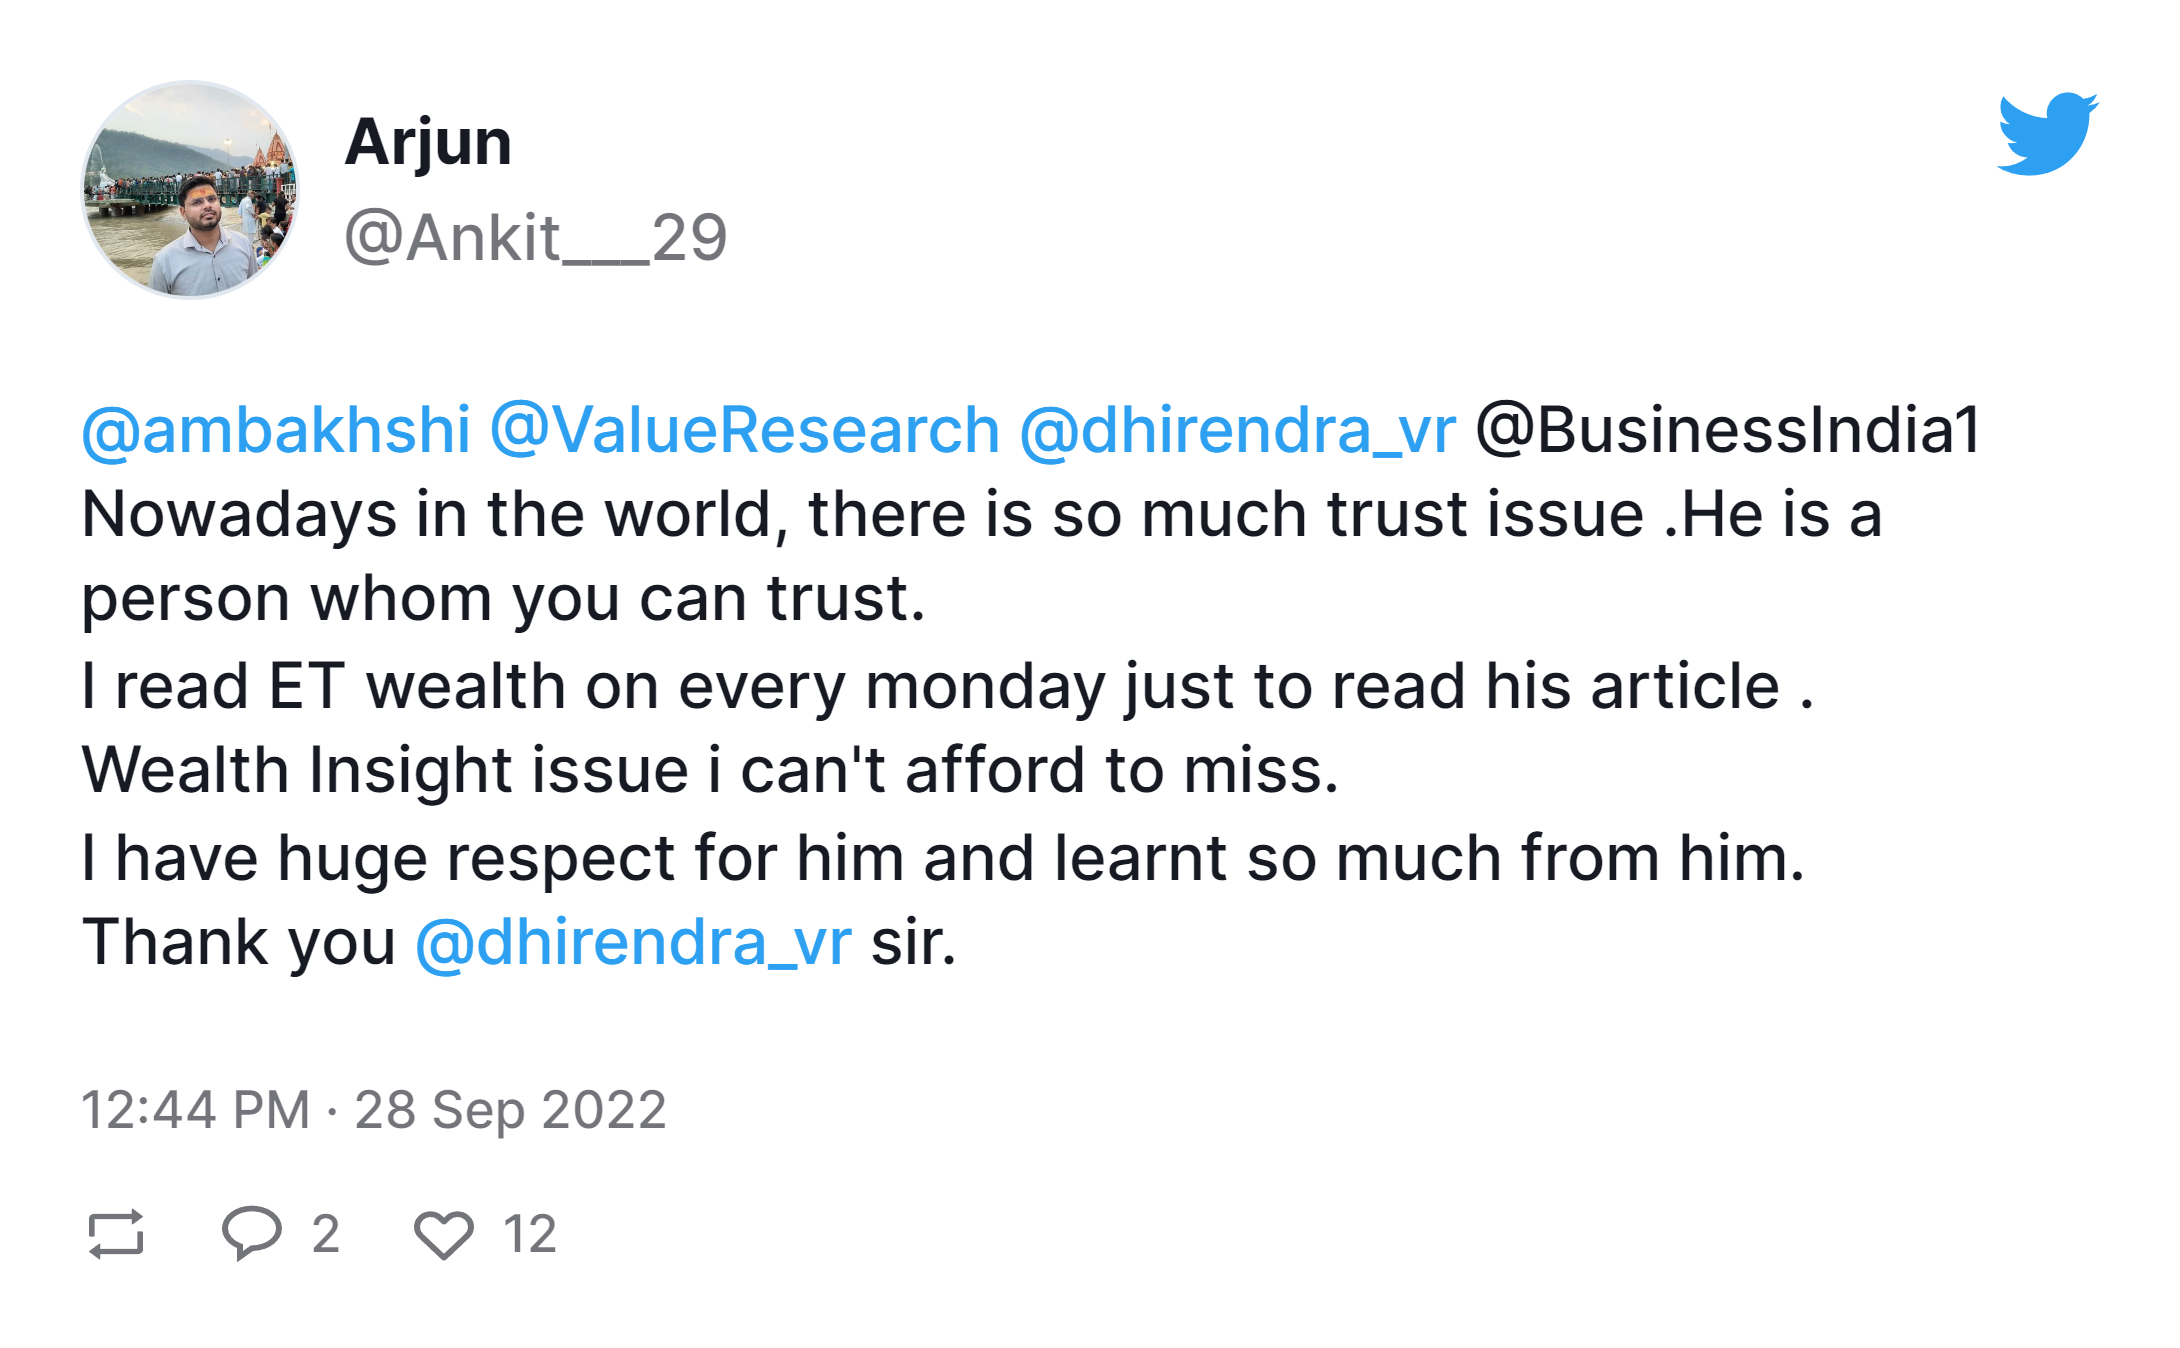 Arjun post about value research